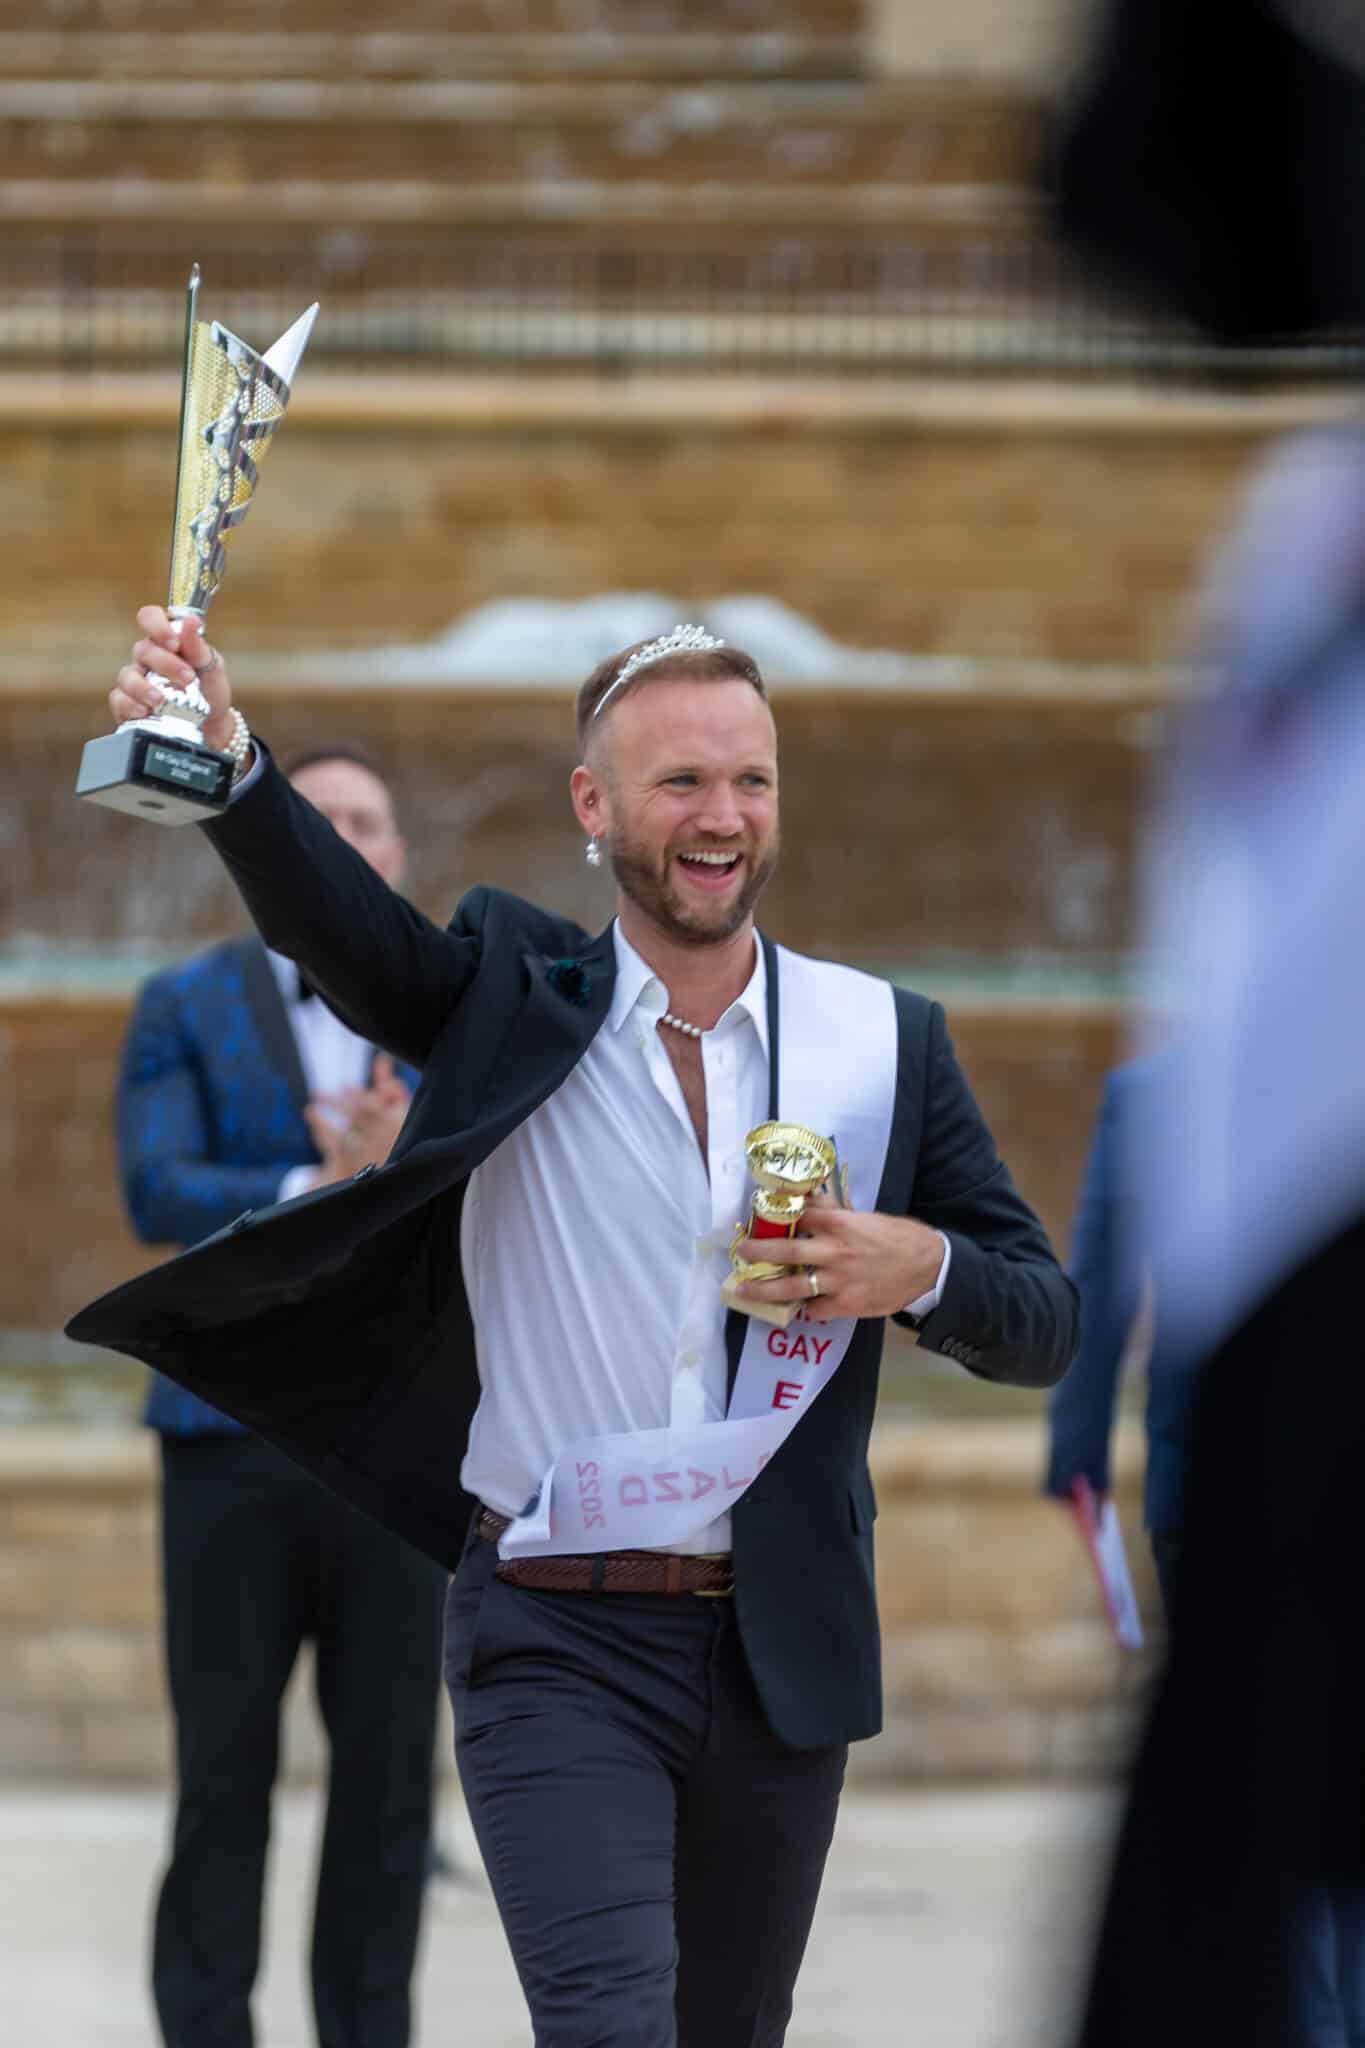 Man in suit holding trophy in the air 